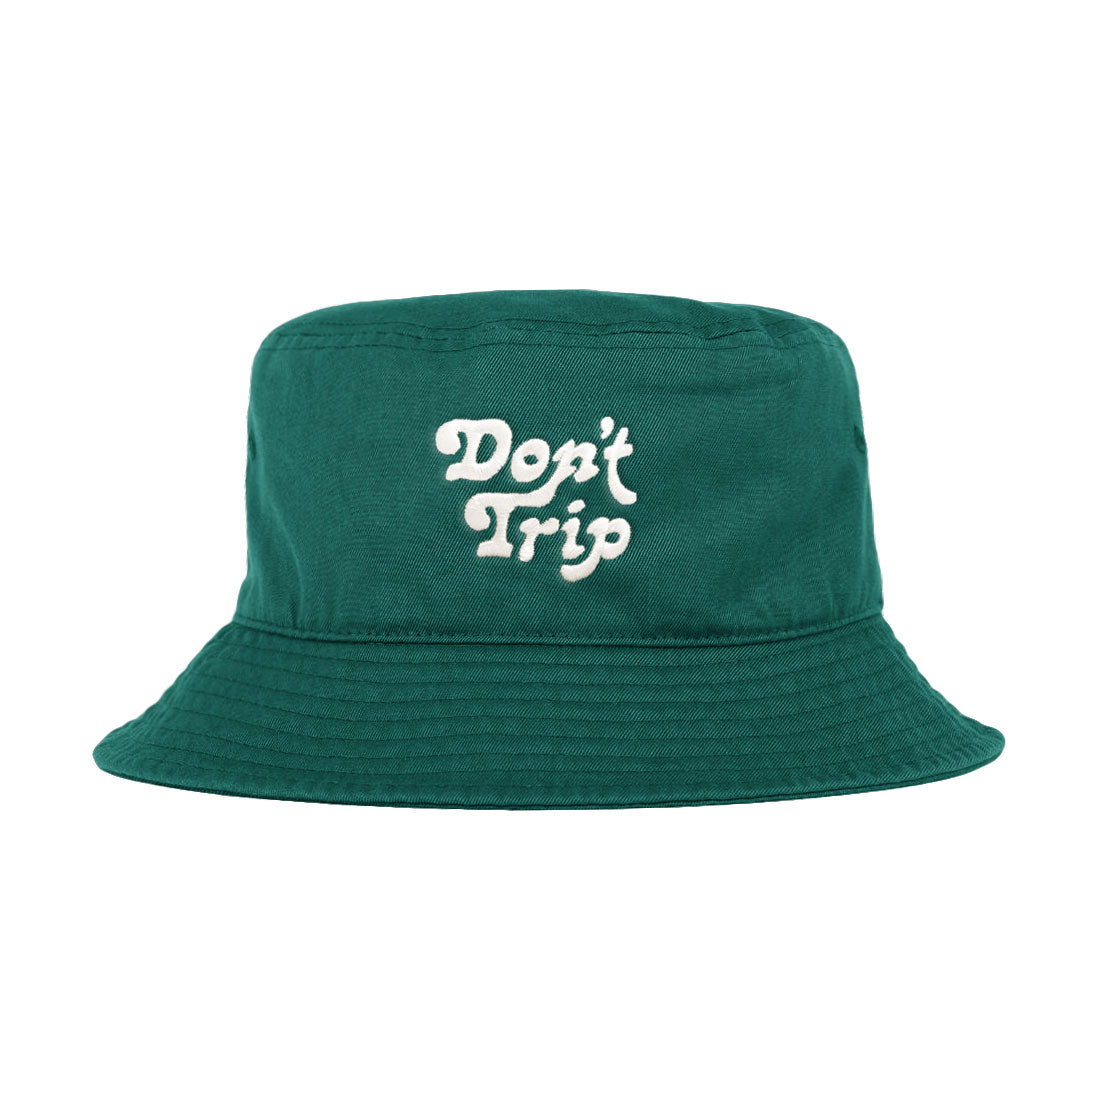 Free & Easy Don't Trip Bucket Hat in green with white Don't Trip embroidery on a white background -Free & Easy